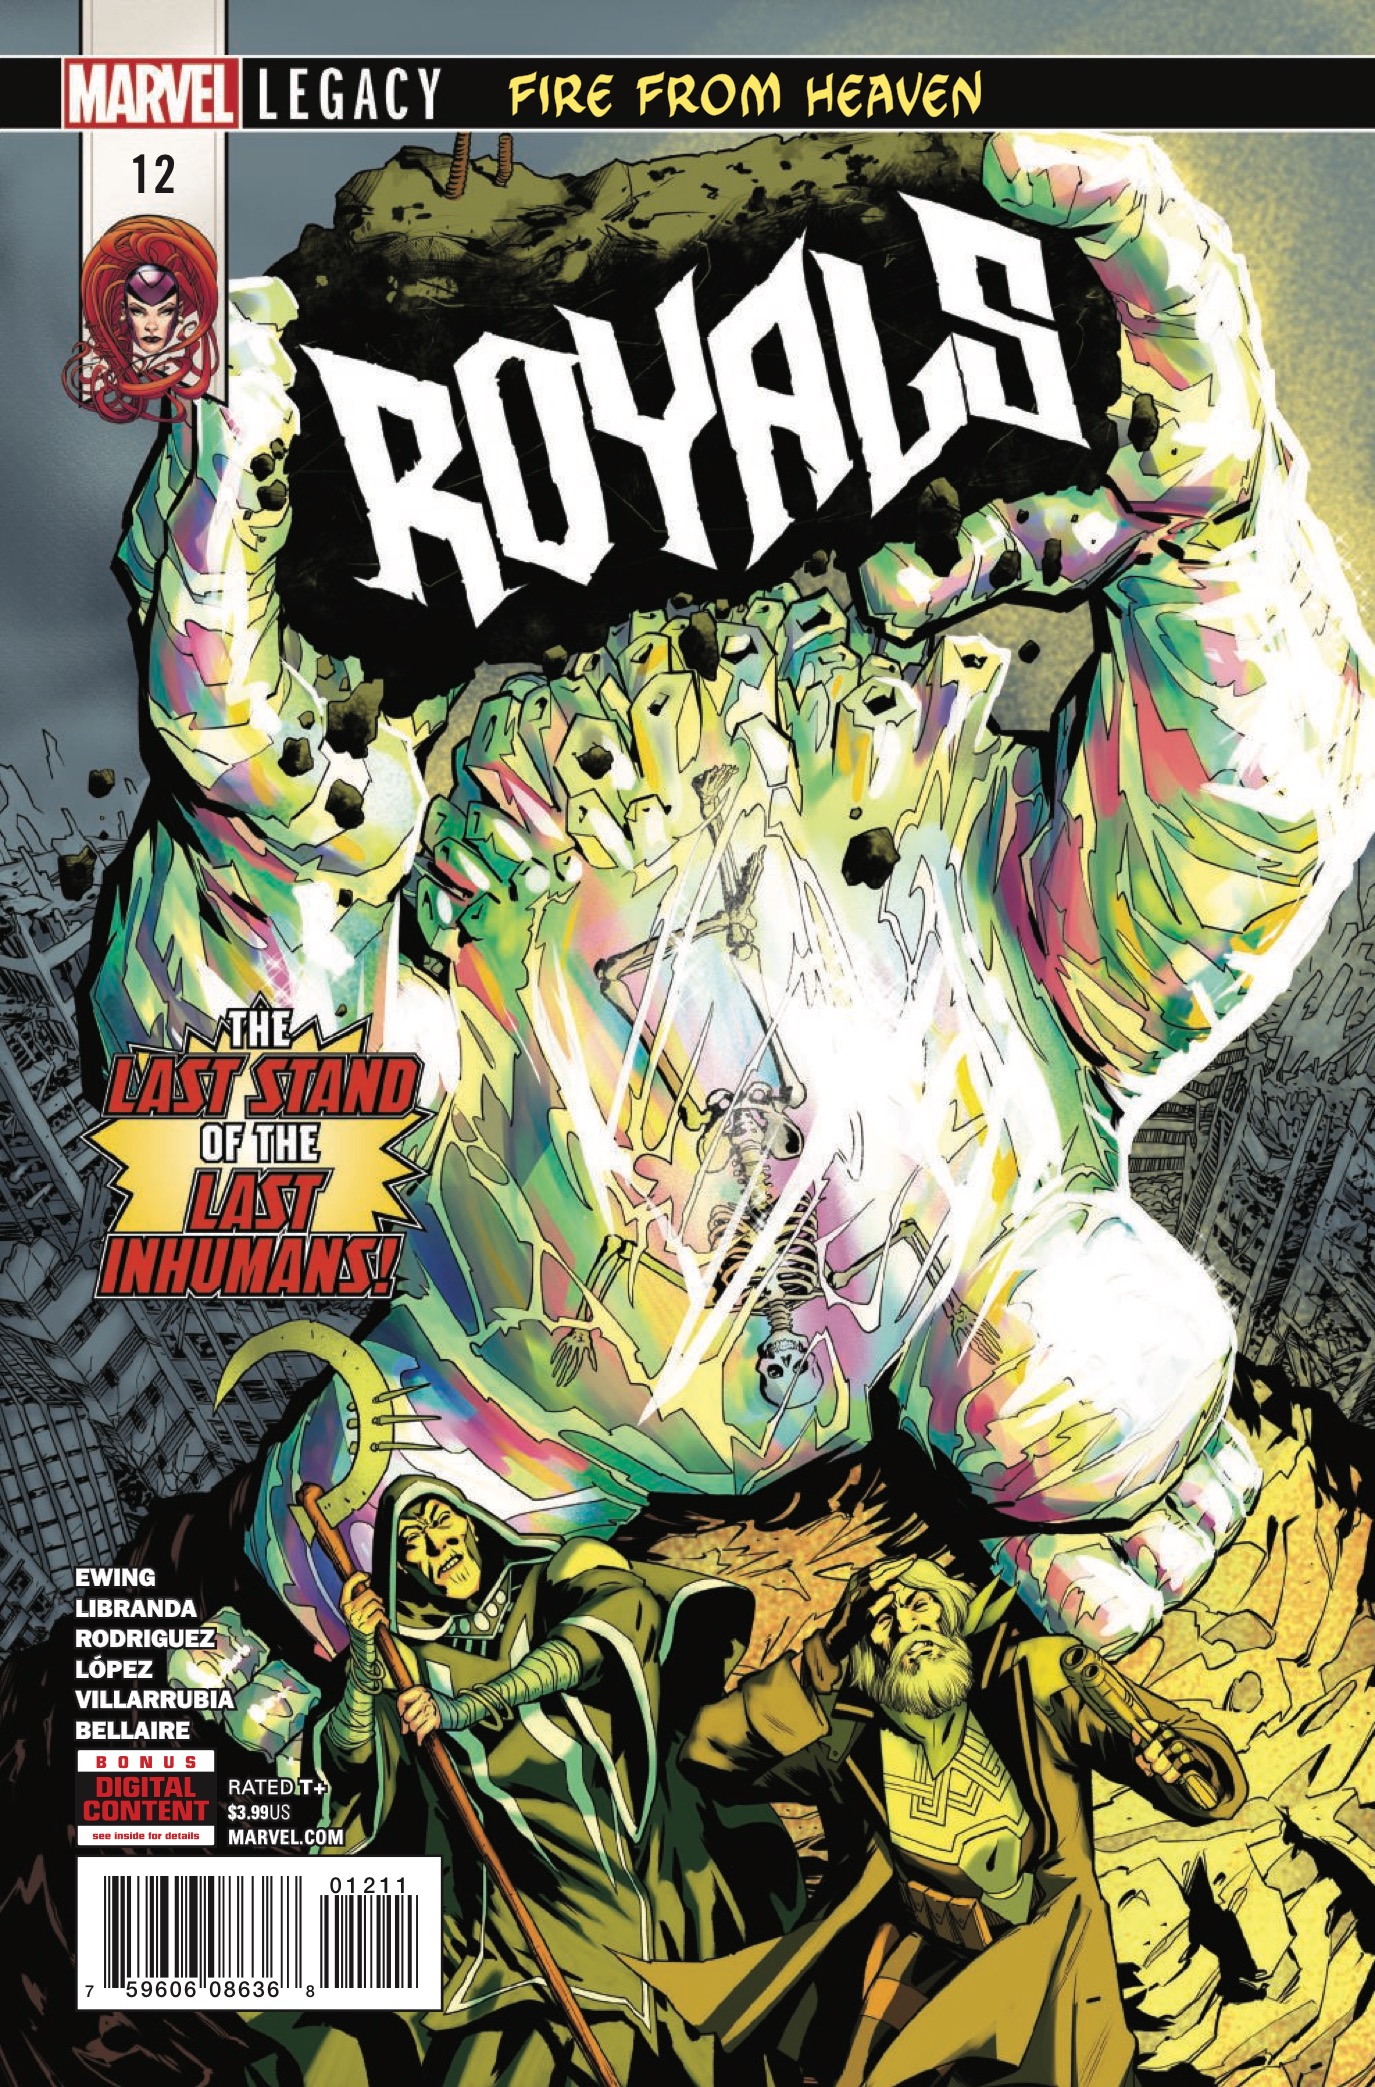 Marvel Preview: Royals #12